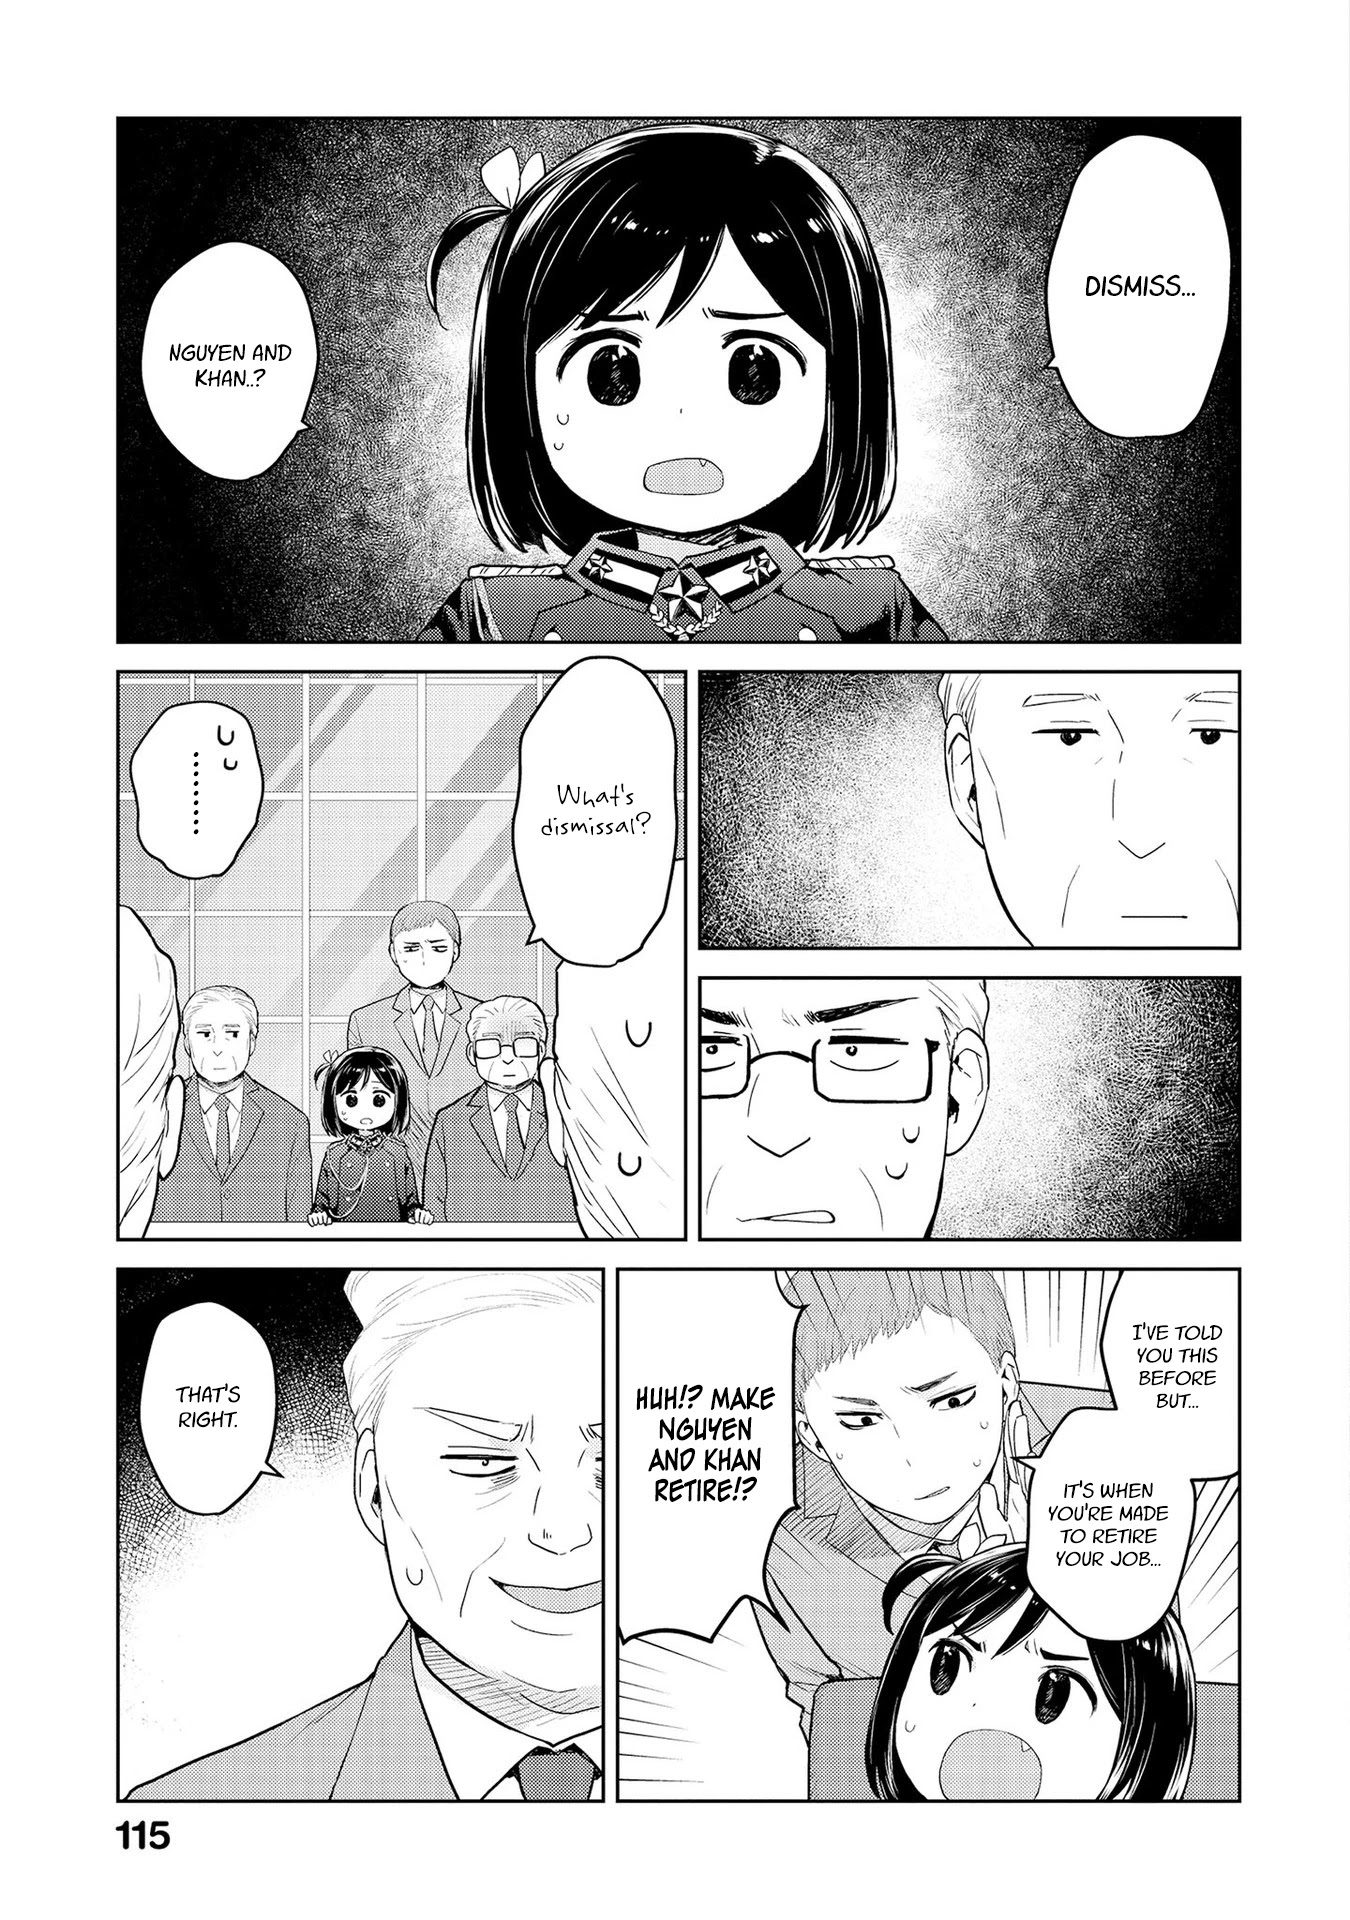 Oh, Our General Myao - Page 3